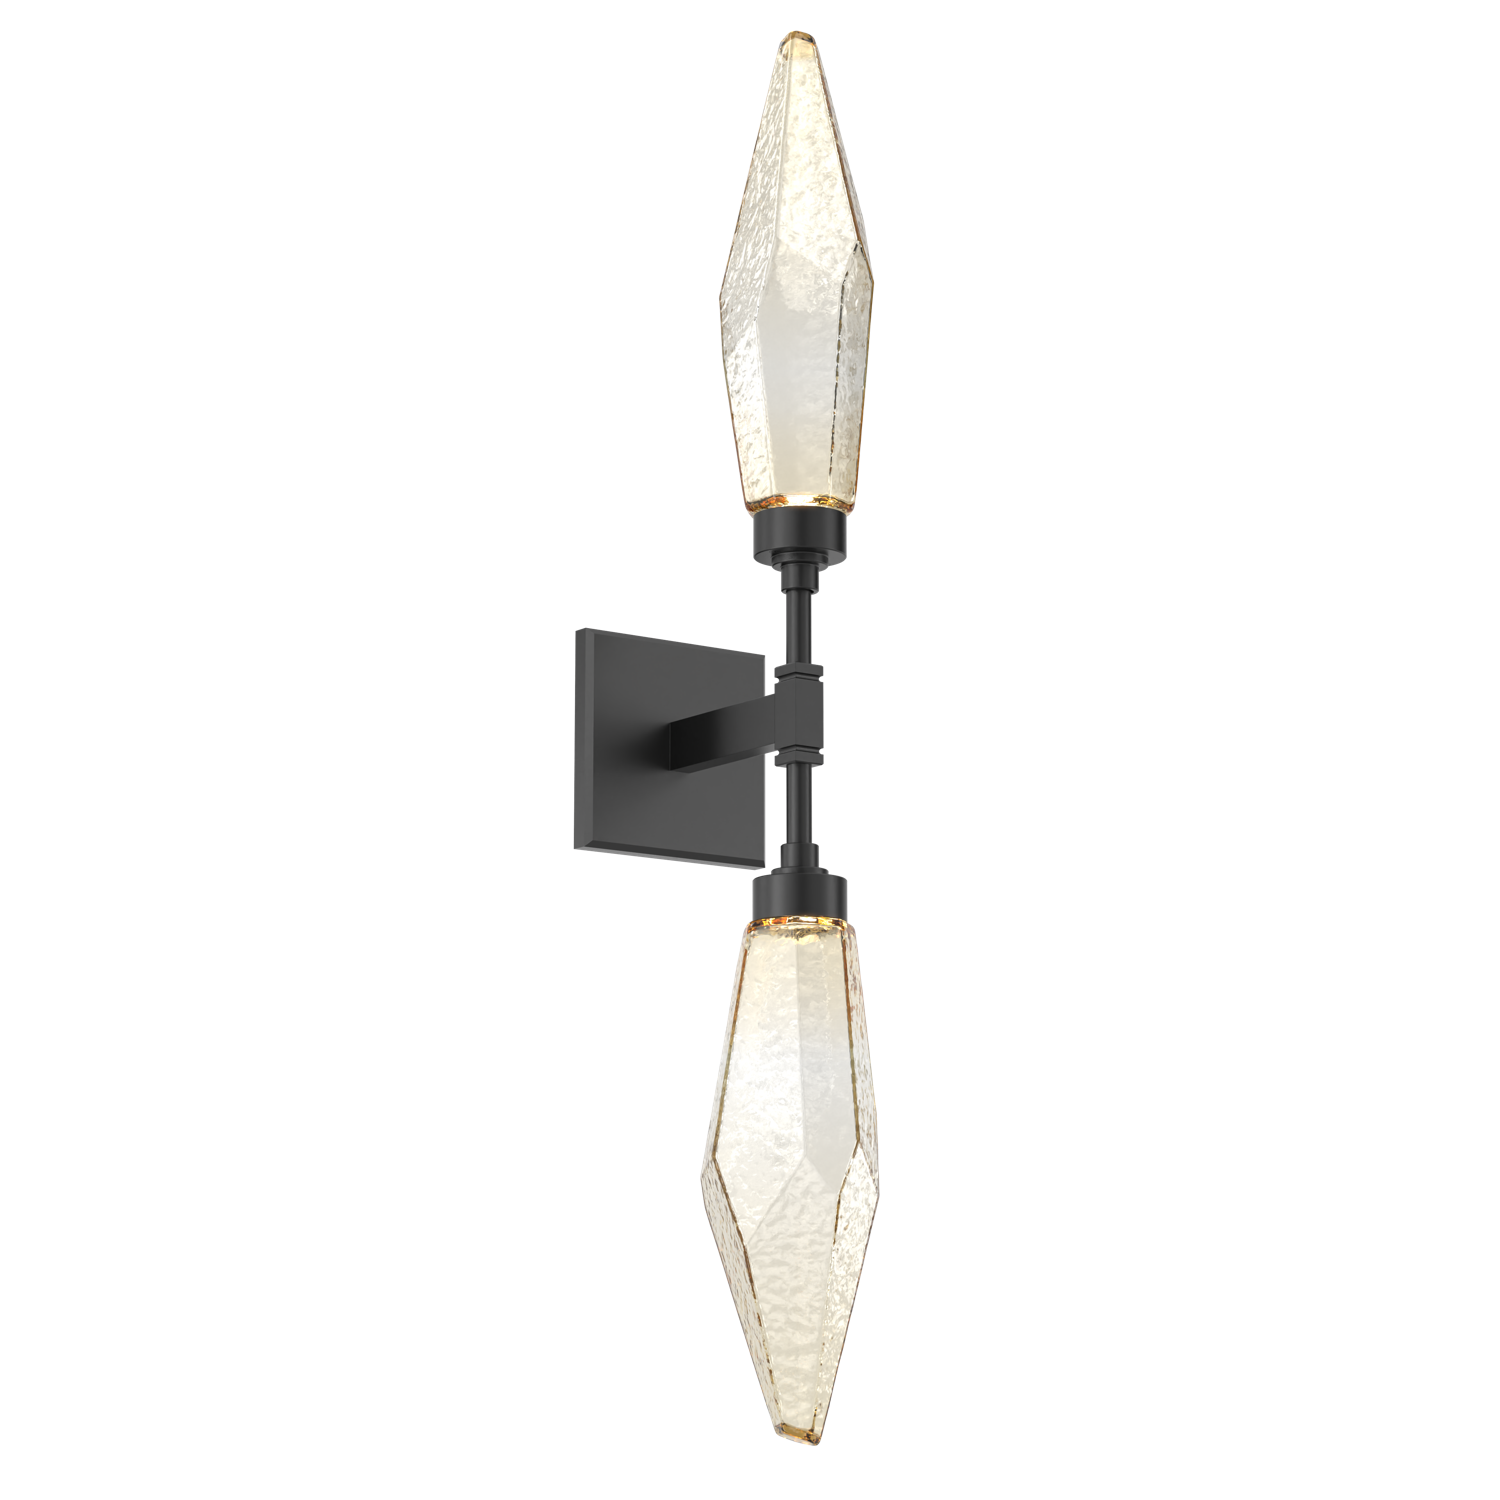 IDB0050-02-MB-CA-Hammerton-Studio-Rock-Crystal-wall-sconce-with-matte-black-finish-and-chilled-amber-blown-glass-shades-and-LED-lamping